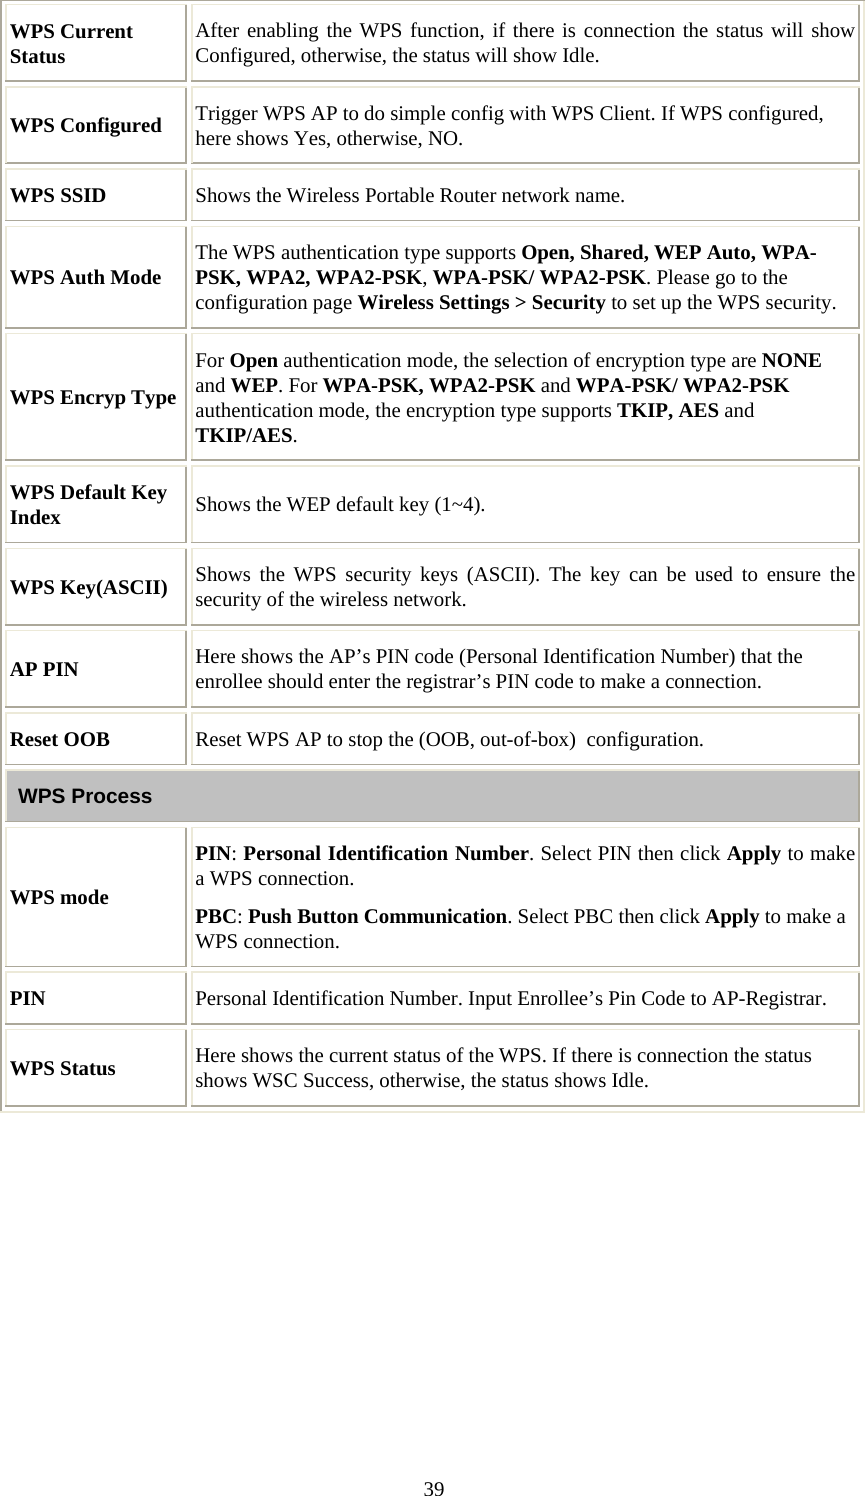   39WPS Current Status  After enabling the WPS function, if there is connection the status will show Configured, otherwise, the status will show Idle. WPS Configured  Trigger WPS AP to do simple config with WPS Client. If WPS configured, here shows Yes, otherwise, NO. WPS SSID  Shows the Wireless Portable Router network name. WPS Auth Mode  The WPS authentication type supports Open, Shared, WEP Auto, WPA-PSK, WPA2, WPA2-PSK, WPA-PSK/ WPA2-PSK. Please go to the configuration page Wireless Settings &gt; Security to set up the WPS security.  WPS Encryp Type For Open authentication mode, the selection of encryption type are NONE and WEP. For WPA-PSK, WPA2-PSK and WPA-PSK/ WPA2-PSK authentication mode, the encryption type supports TKIP, AES and TKIP/AES. WPS Default Key Index  Shows the WEP default key (1~4). WPS Key(ASCII)  Shows the WPS security keys (ASCII). The key can be used to ensure the security of the wireless network.  AP PIN  Here shows the AP’s PIN code (Personal Identification Number) that the enrollee should enter the registrar’s PIN code to make a connection. Reset OOB  Reset WPS AP to stop the (OOB, out-of-box)  configuration.  WPS Process WPS mode PIN: Personal Identification Number. Select PIN then click Apply to make a WPS connection. PBC: Push Button Communication. Select PBC then click Apply to make a WPS connection. PIN  Personal Identification Number. Input Enrollee’s Pin Code to AP-Registrar. WPS Status  Here shows the current status of the WPS. If there is connection the status shows WSC Success, otherwise, the status shows Idle. 